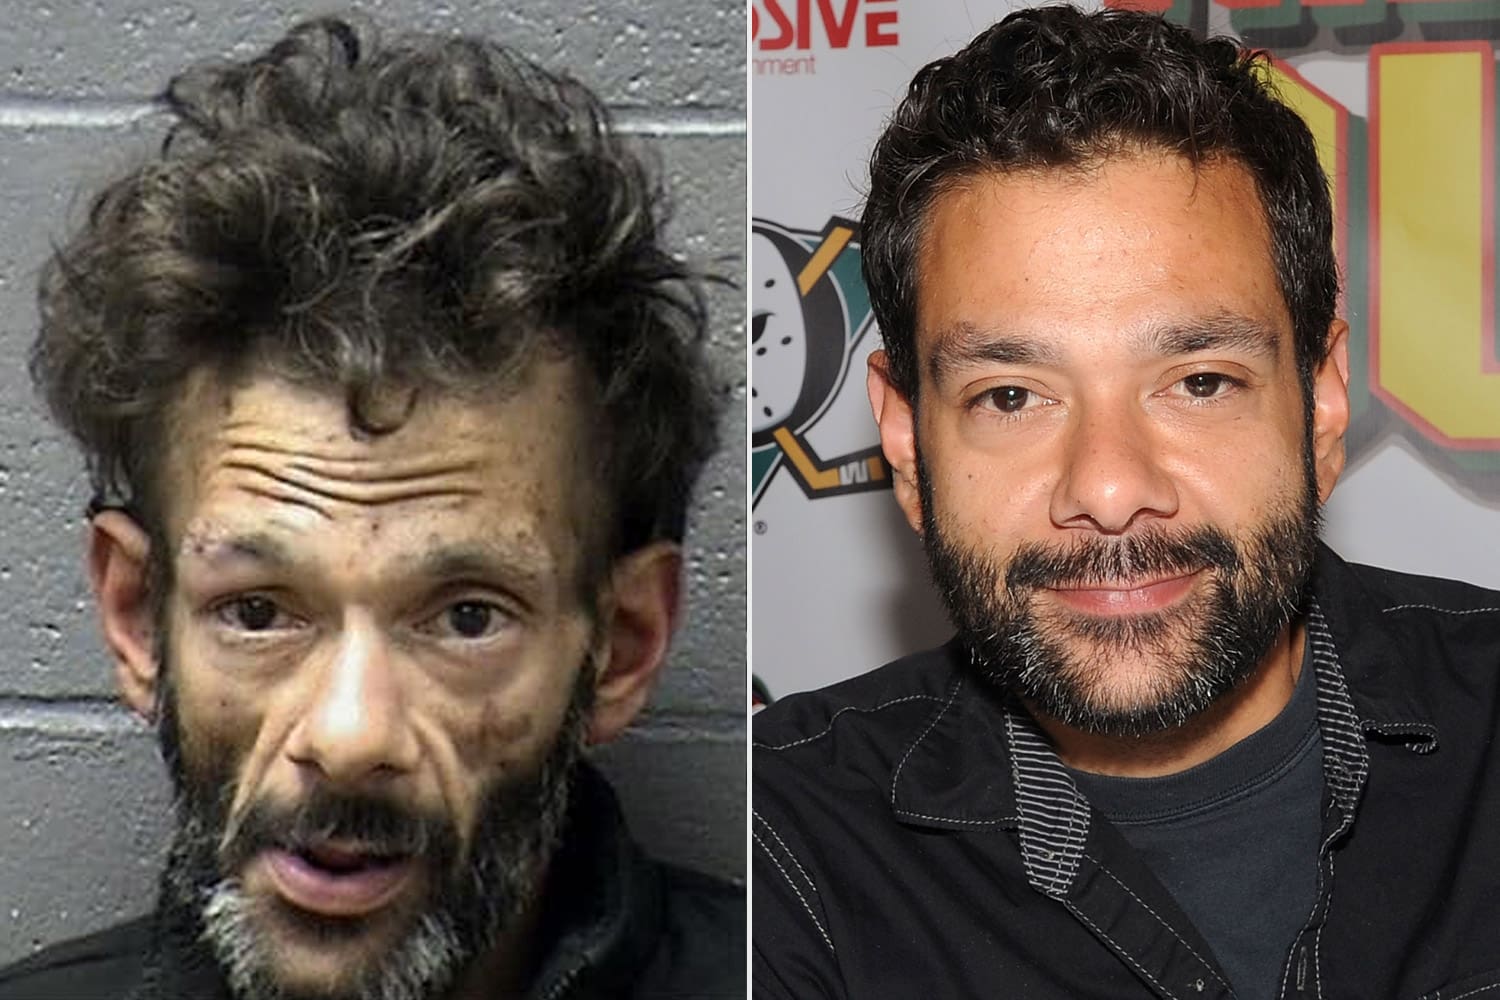 Shaun Weiss Arrested And His Mugshot Makes Fans Really ‘Sad’ – Meth Addiction ...